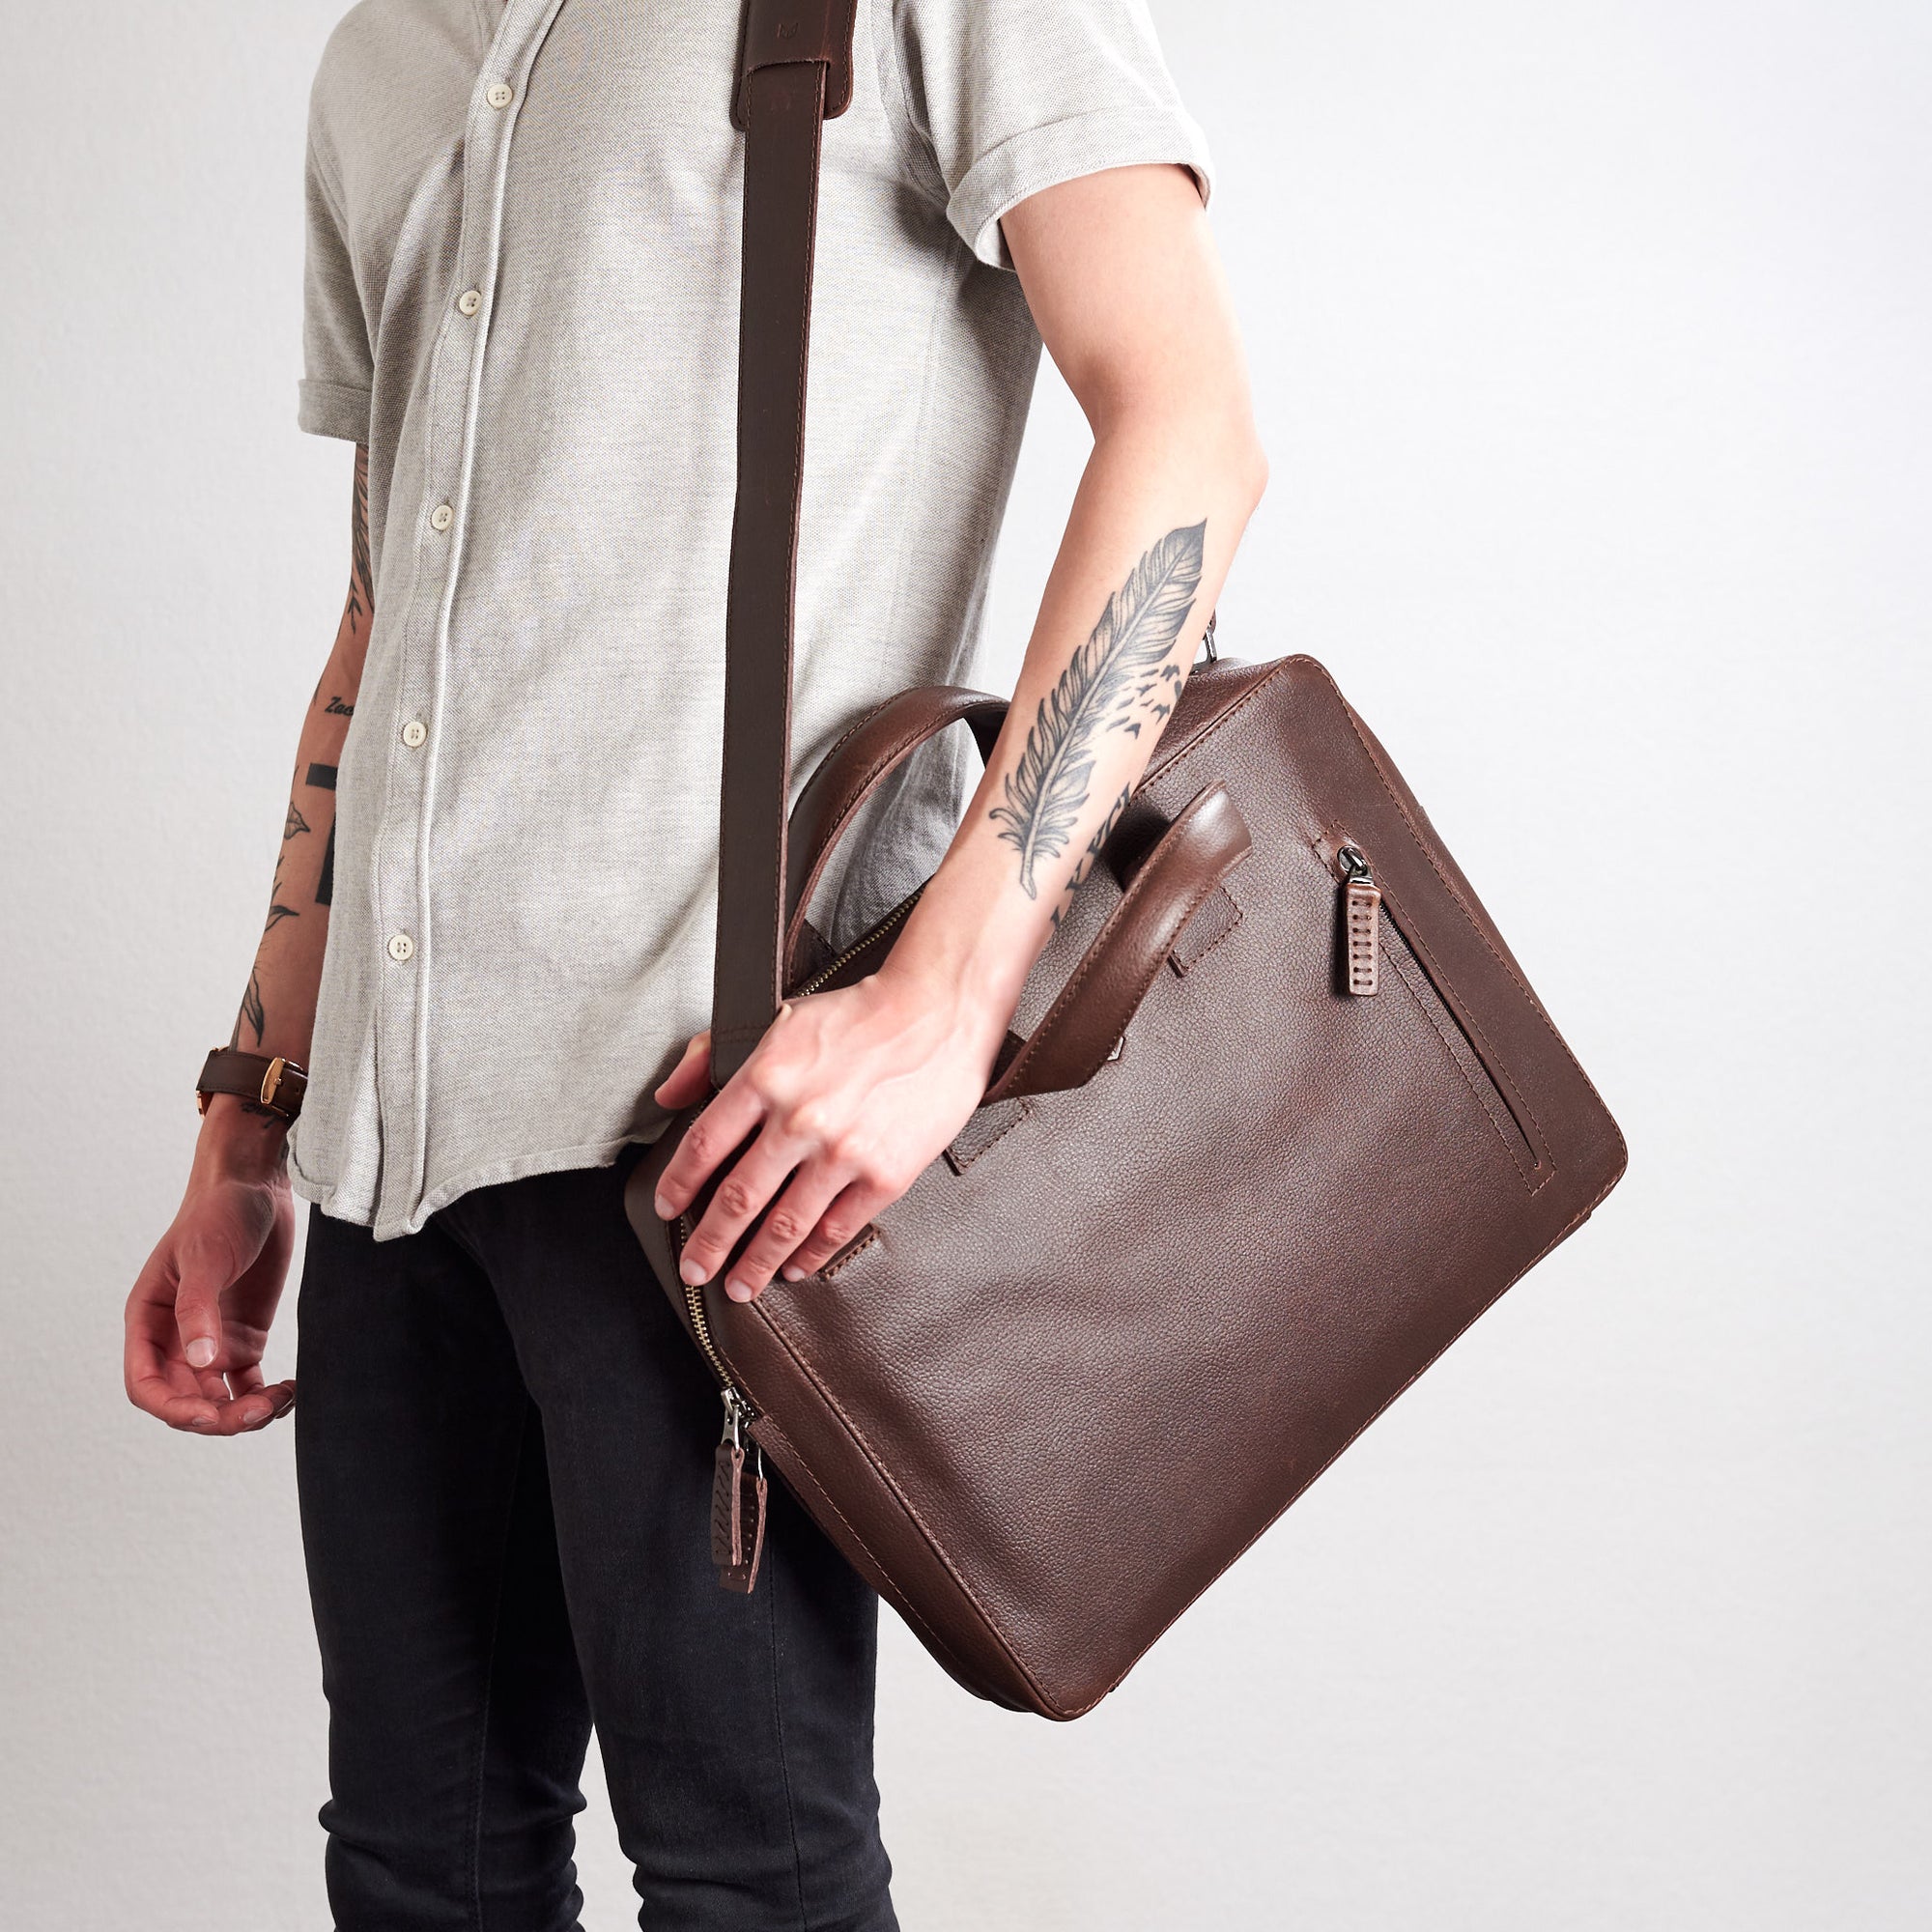 Roko briefcase in color dark brown. Style front picture with shoulder strap in use.